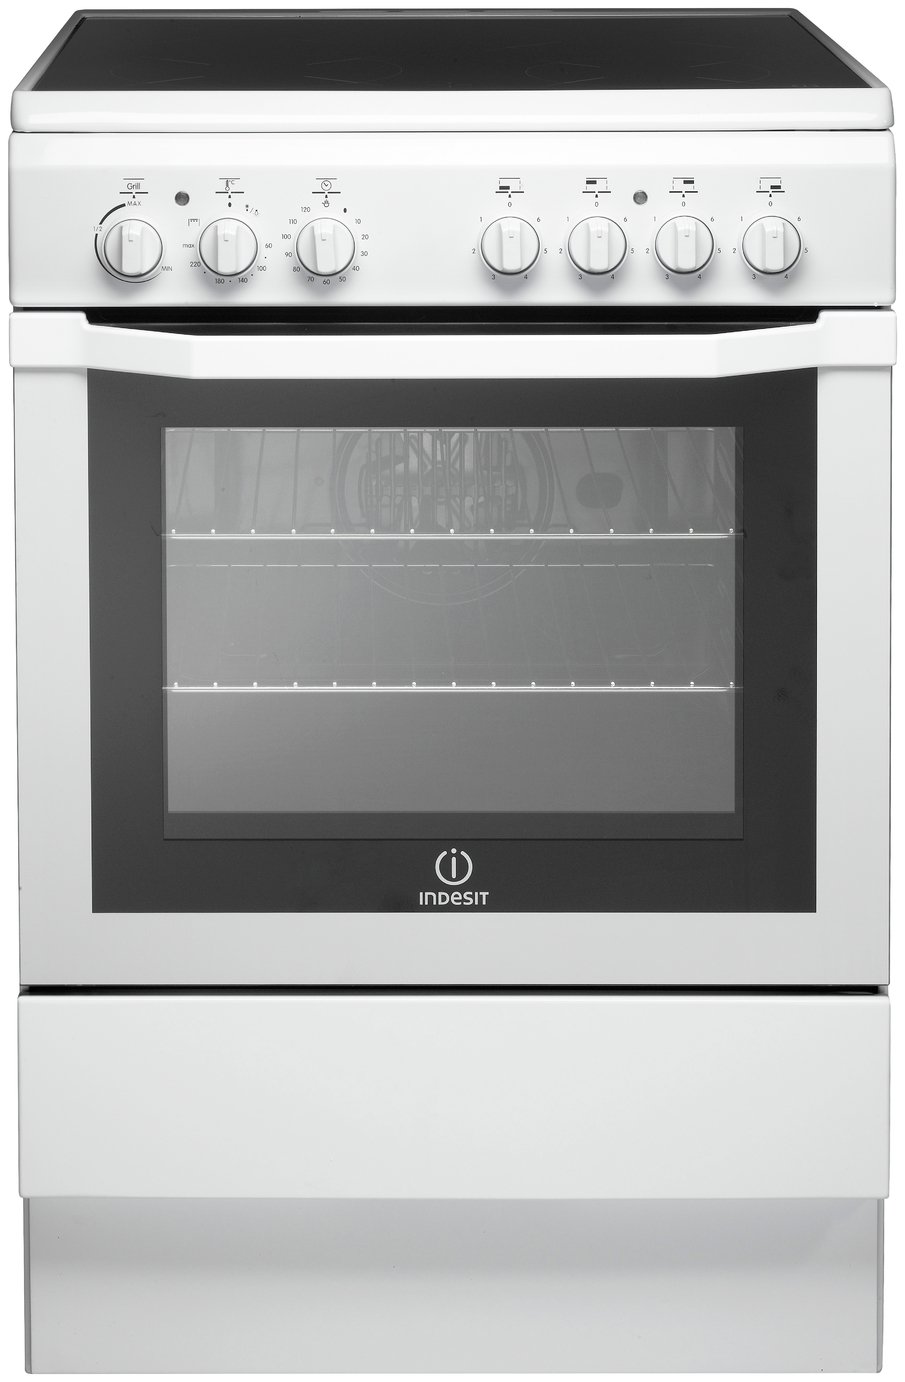 Indesit I6VV2AW 60cm Single Oven Electric Cooker - White